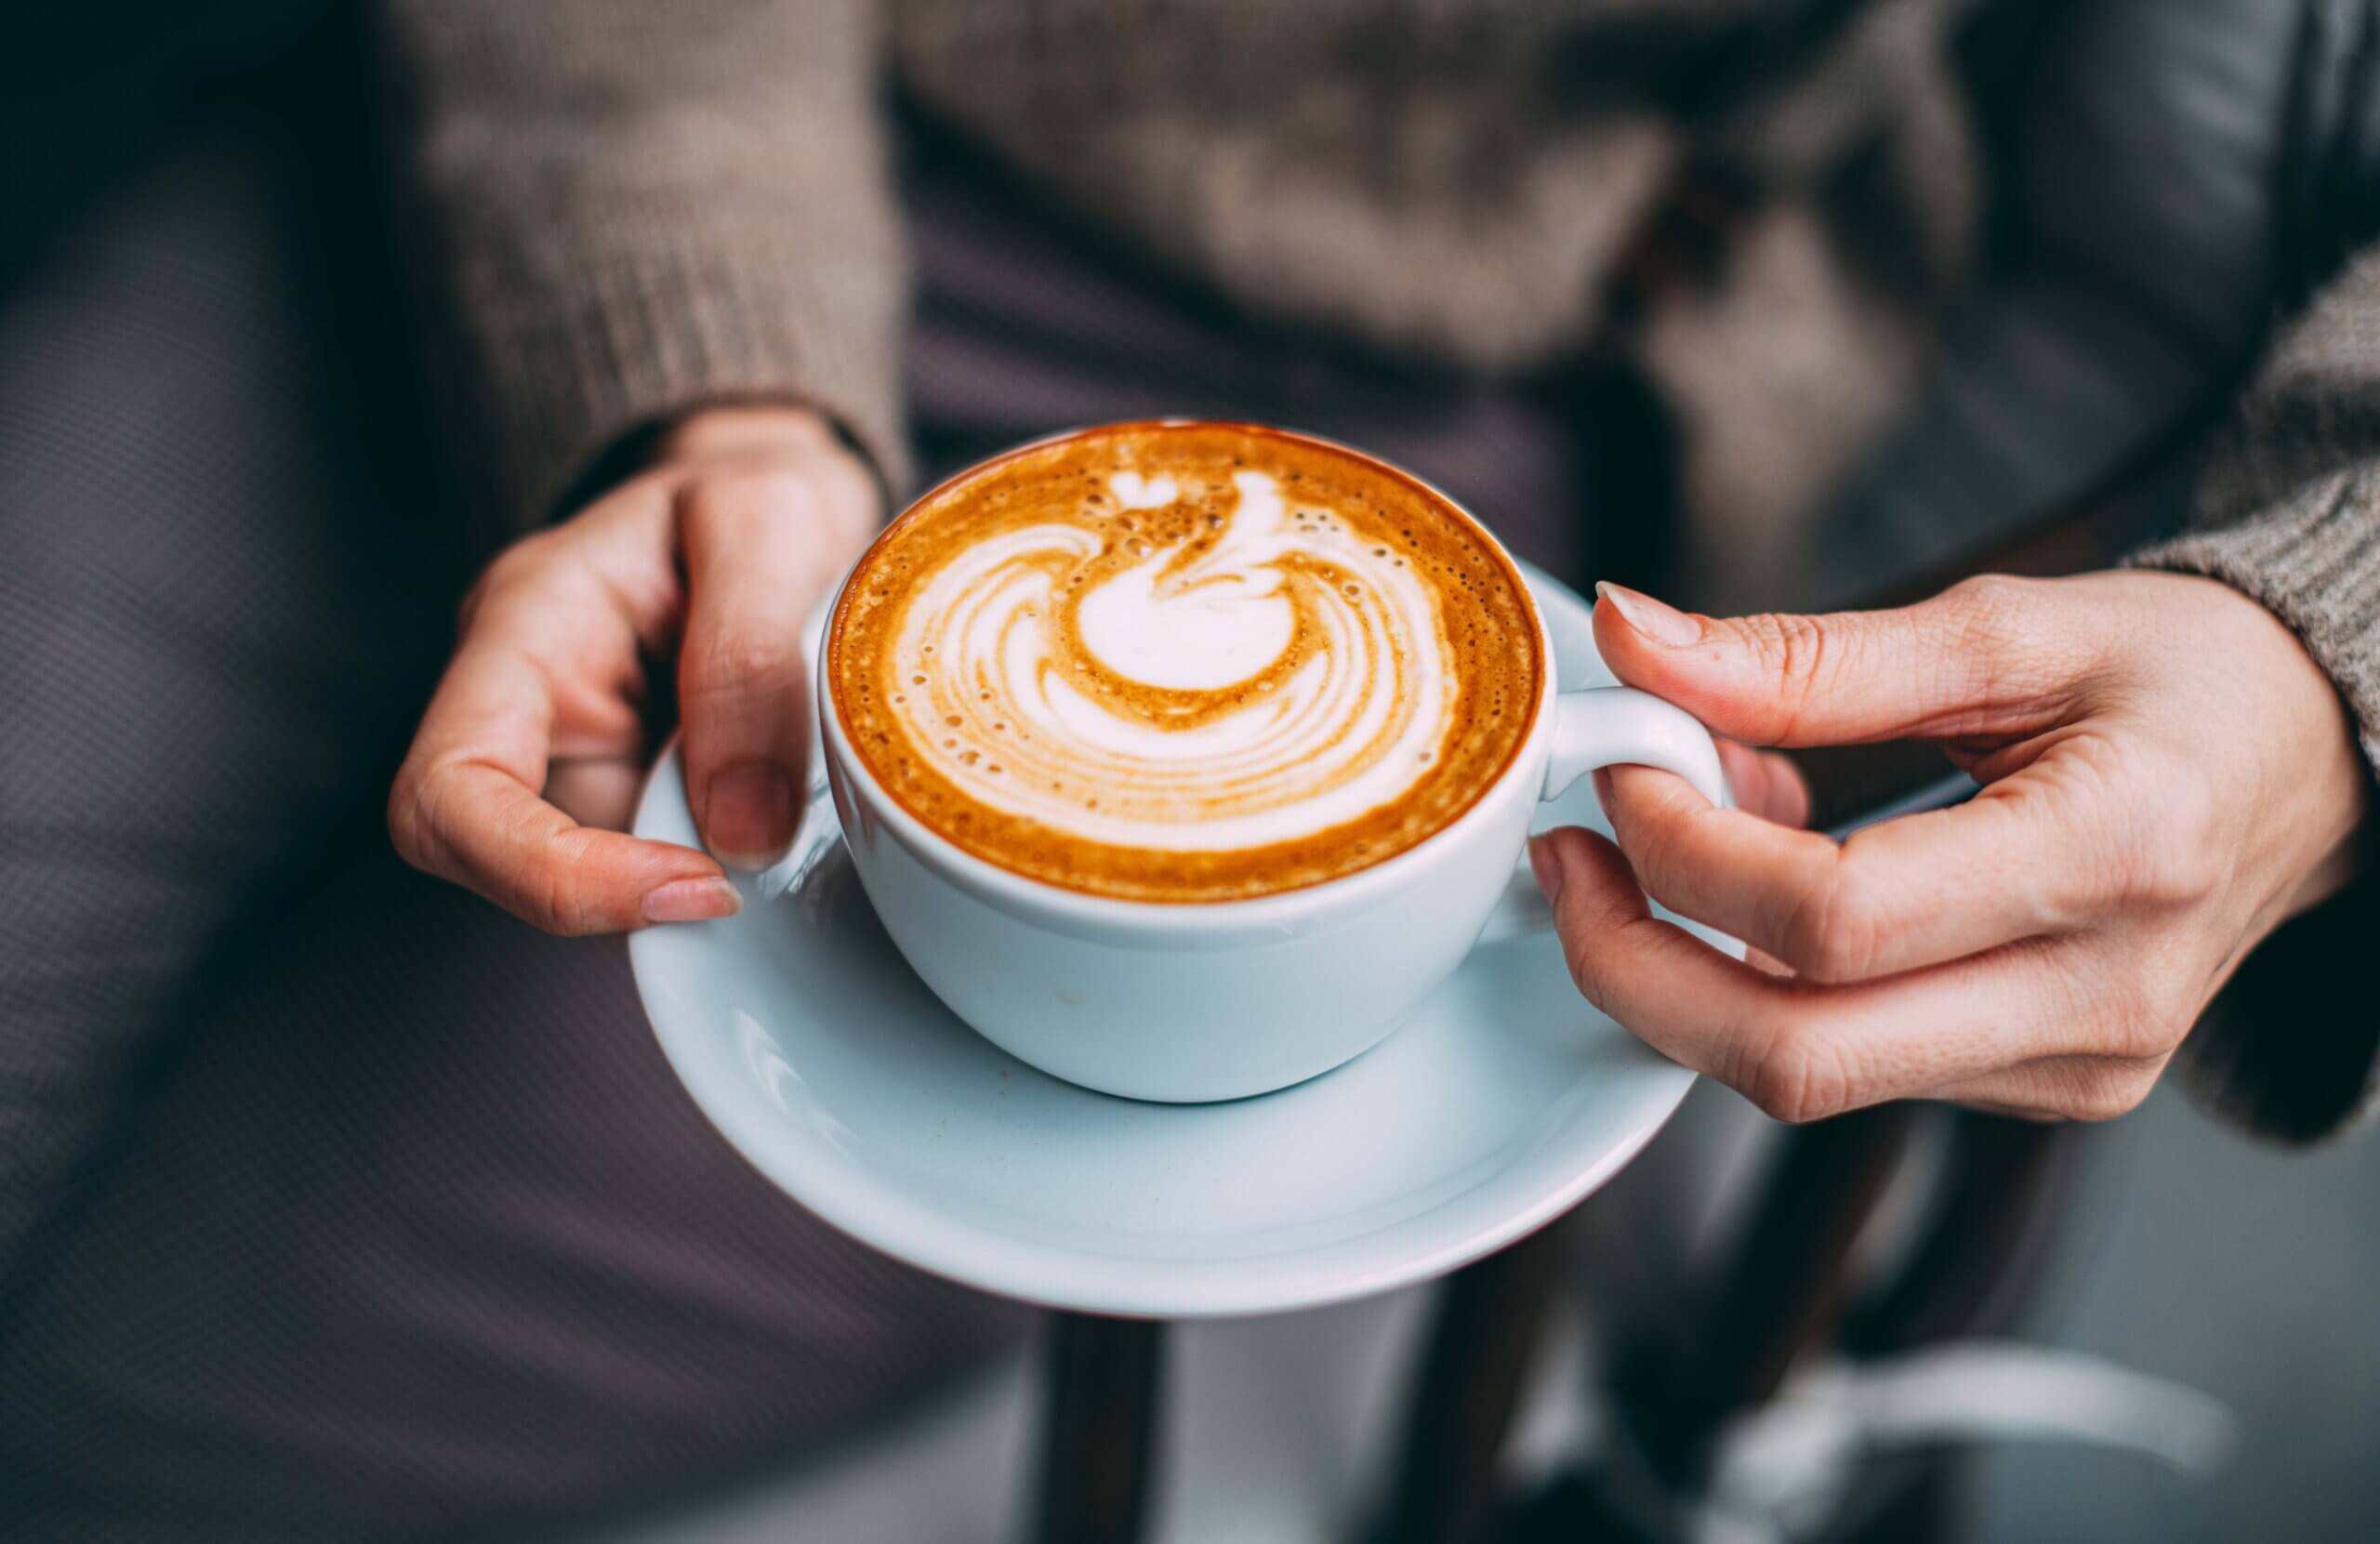 Woman's hands holding frothy latte in white cup and saucer.